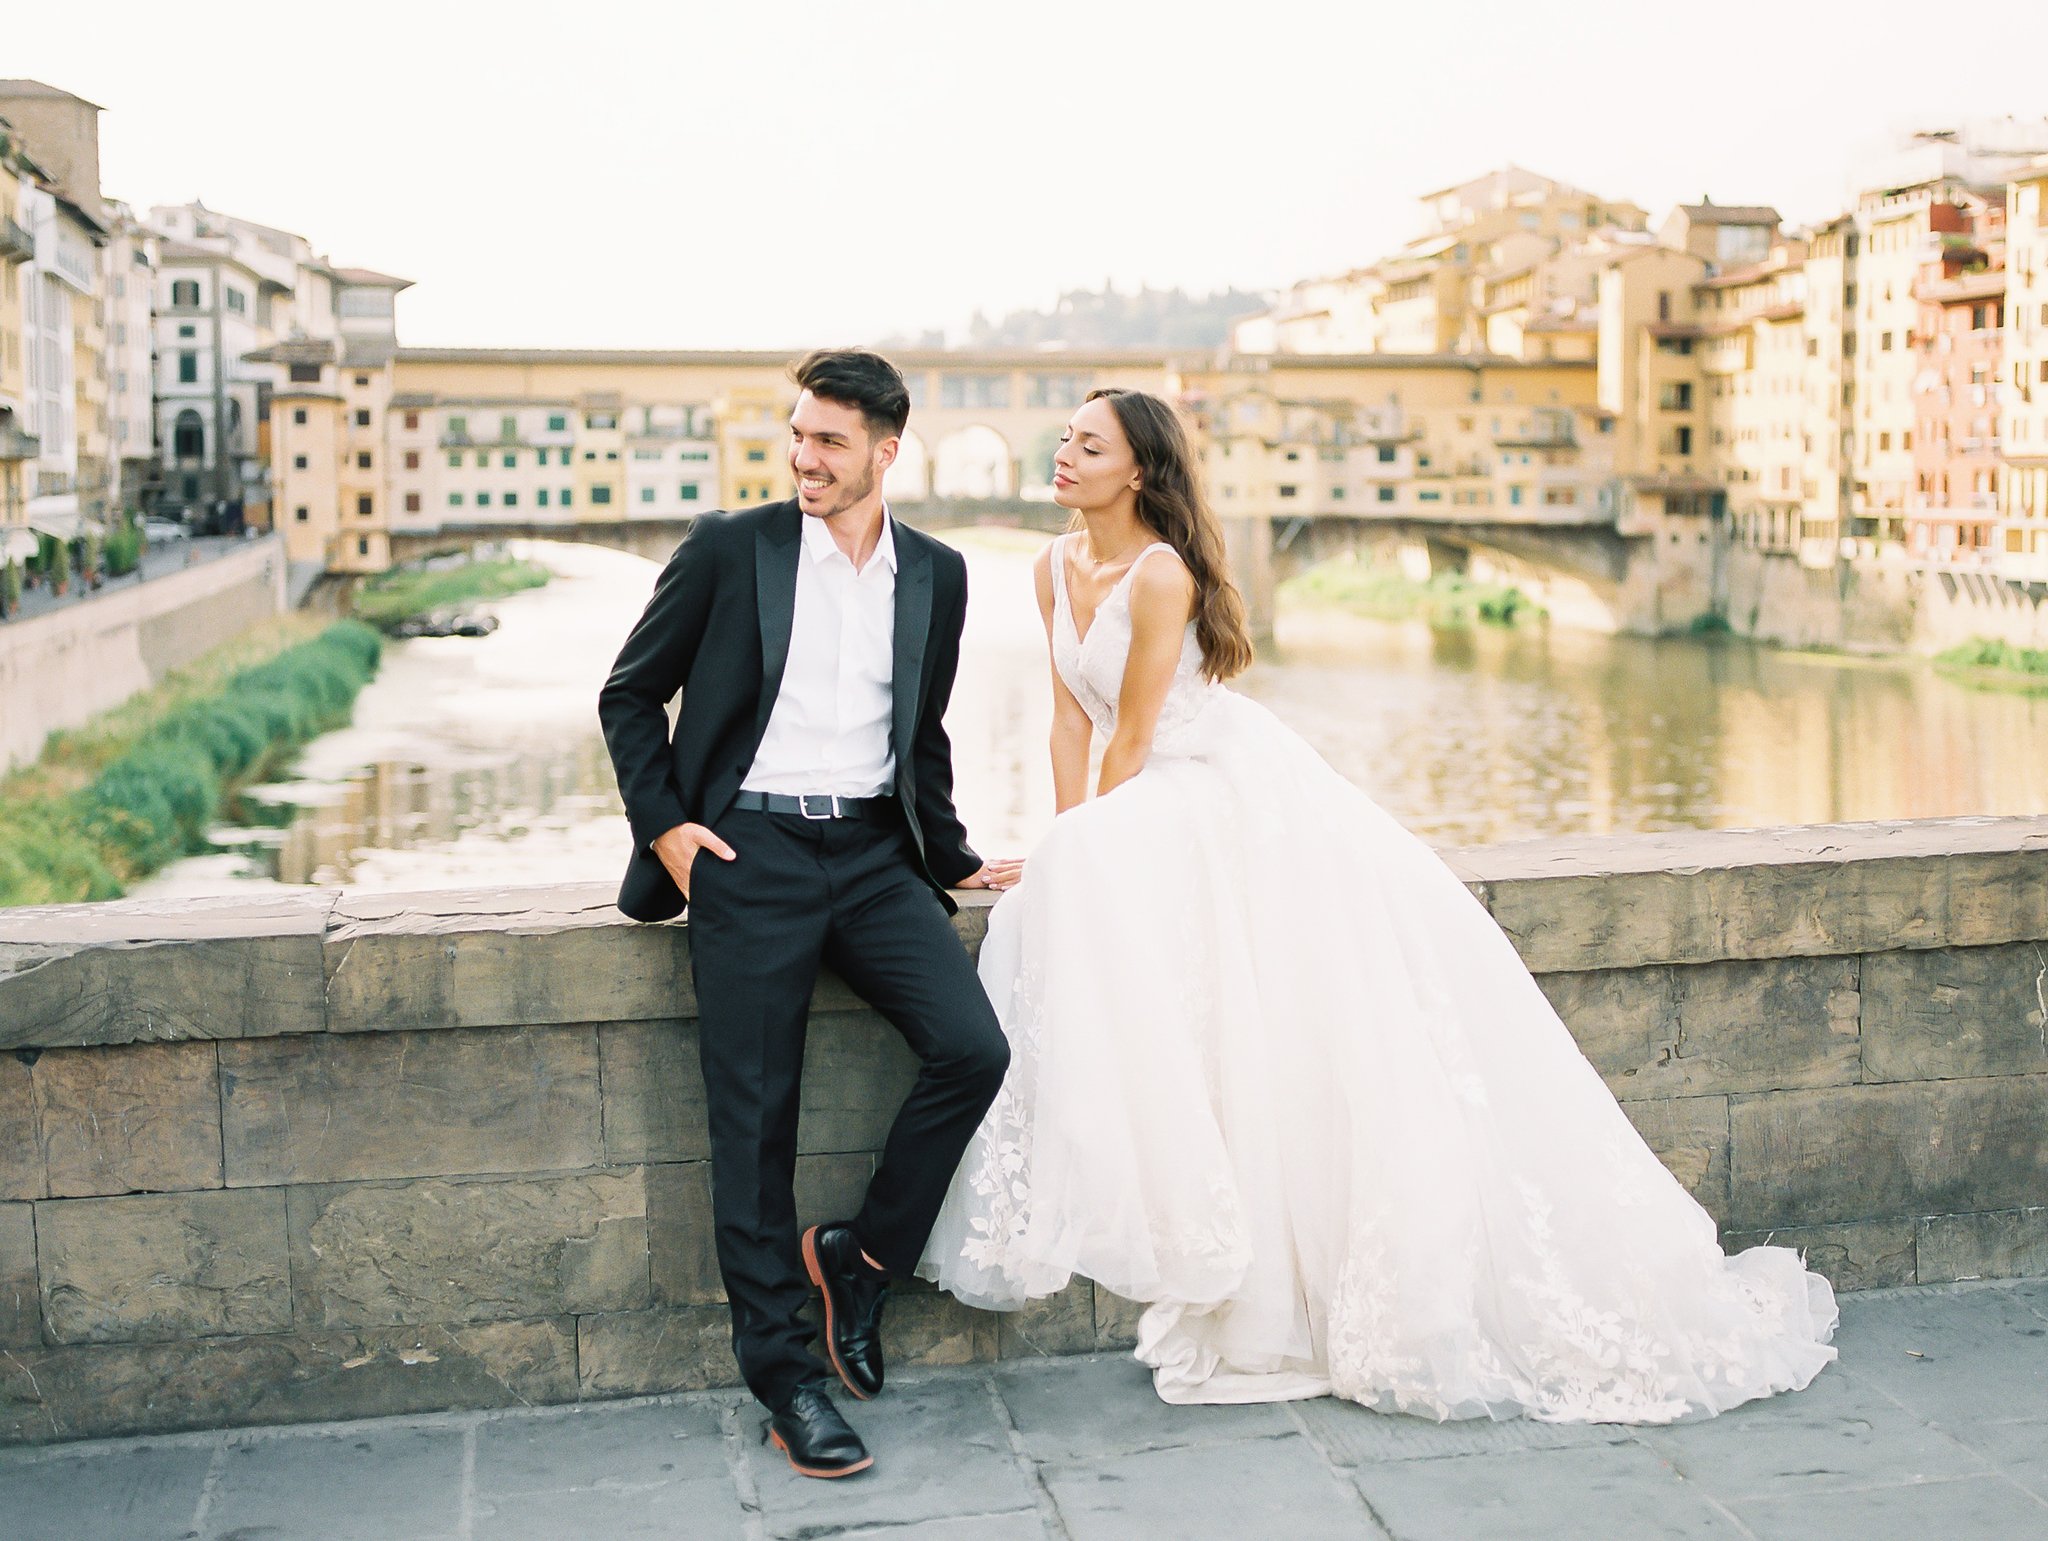 A wedding couple in Florence Italy taking a break sitting on the edge of a bridge with Ponte Vecchio in the background, image taken by Kelley Williams a Florence Italy wedding photographer